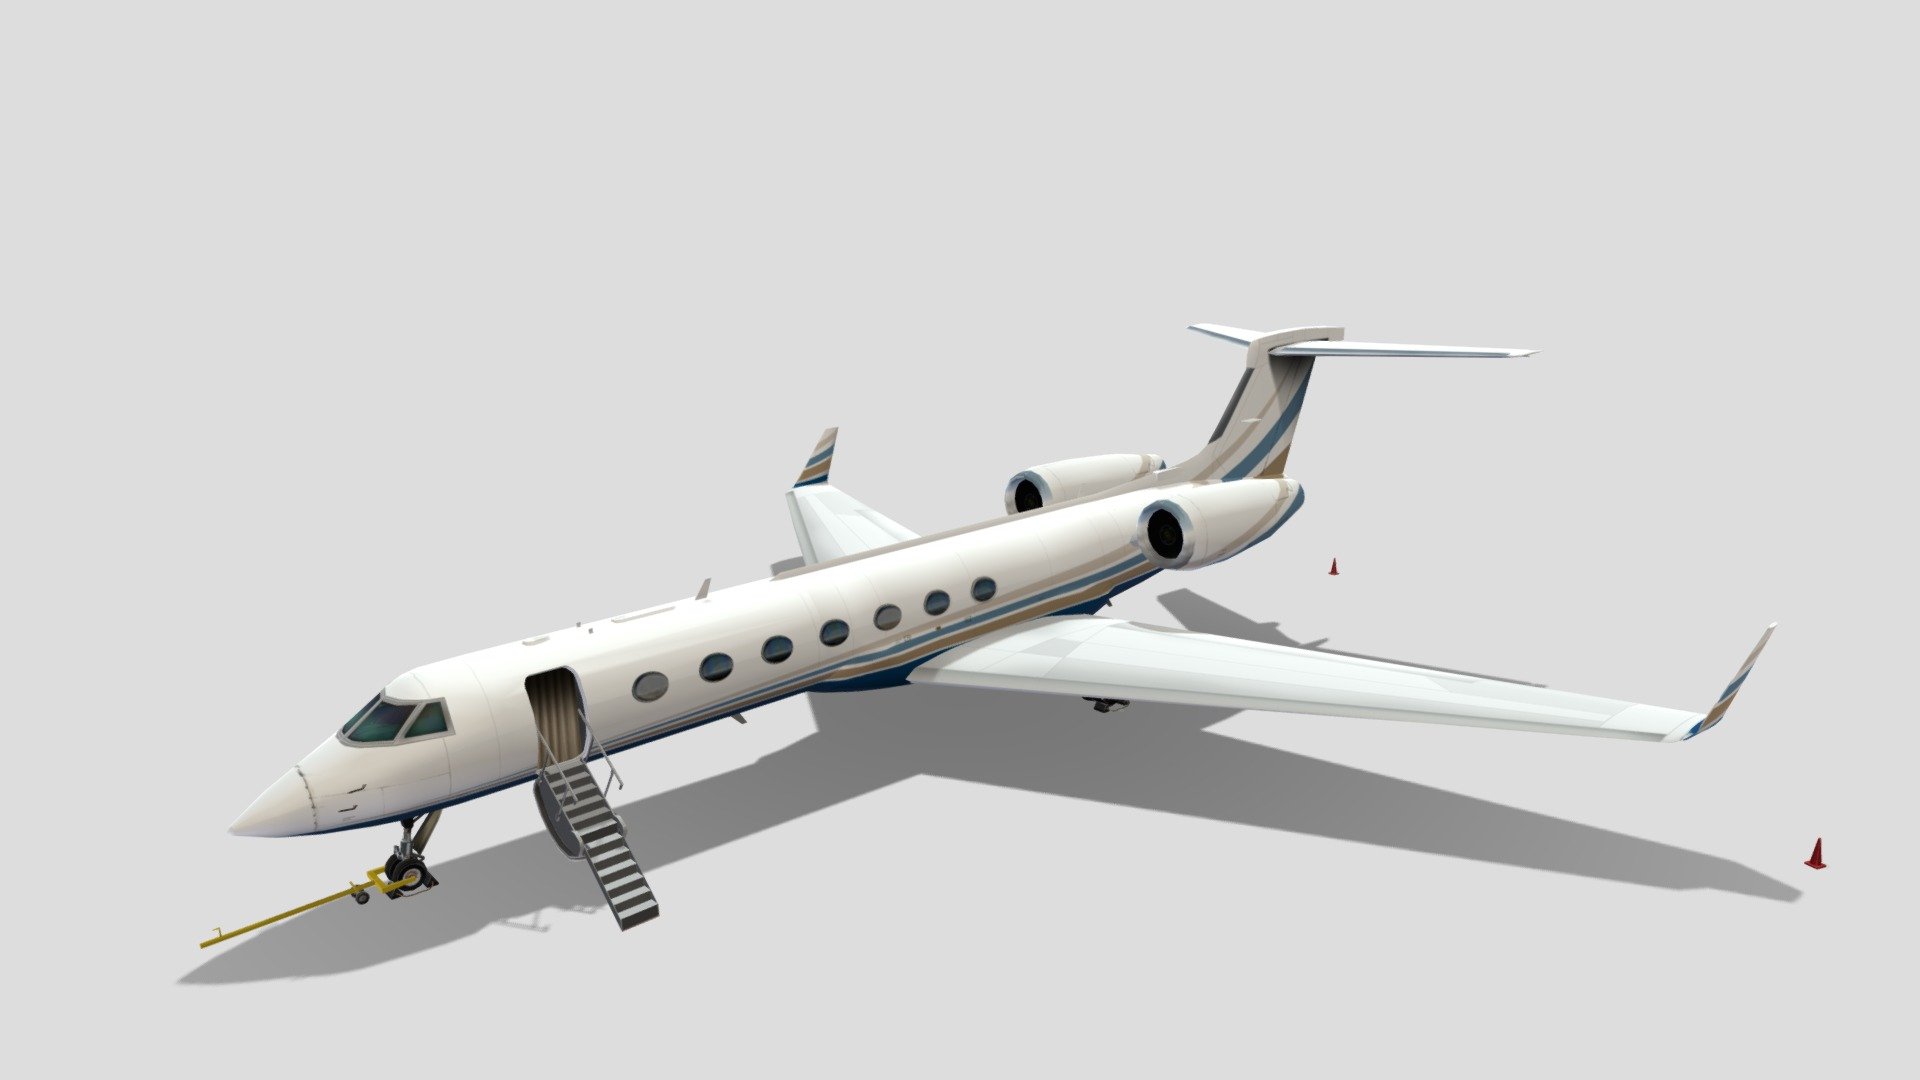 _The Gulfstream G550 is a business jet aircraft produced by General Dynamics' Gulfstream Aerospace unit in Savannah, Georgia, US. The certification designation is GV-SP. A version with reduced fuel capacity was marketed as the G500. Gulfstream ceased production of the G550 in July 2021. The G550 (GV-SP) with improved engines received its FAA type certificate on August 14, 2003.[2] In 2014, Gulfstream looked at a re-engine with the Rolls-Royce Pearl BR700 development announced in May 2018 for the new Global Express 5500 and 6500 variants but preferred the BR725-powered, 7,500 nmi G650.[3] The 500th Gulfstream G550 aircraft was delivered in May 2015.

static, non rigged, Lowpoly, blank layered 2048 psd template layered texture, for MSFS or XPlane Scenery Airport development , standard materials, not a detailed interior just enough to be seen as part of enviroment.

thanks for looking! dont forget to check my other models - Gulfstream G550 Low Poly Static Aircraft Blank - Buy Royalty Free 3D model by hangarcerouno 3d model